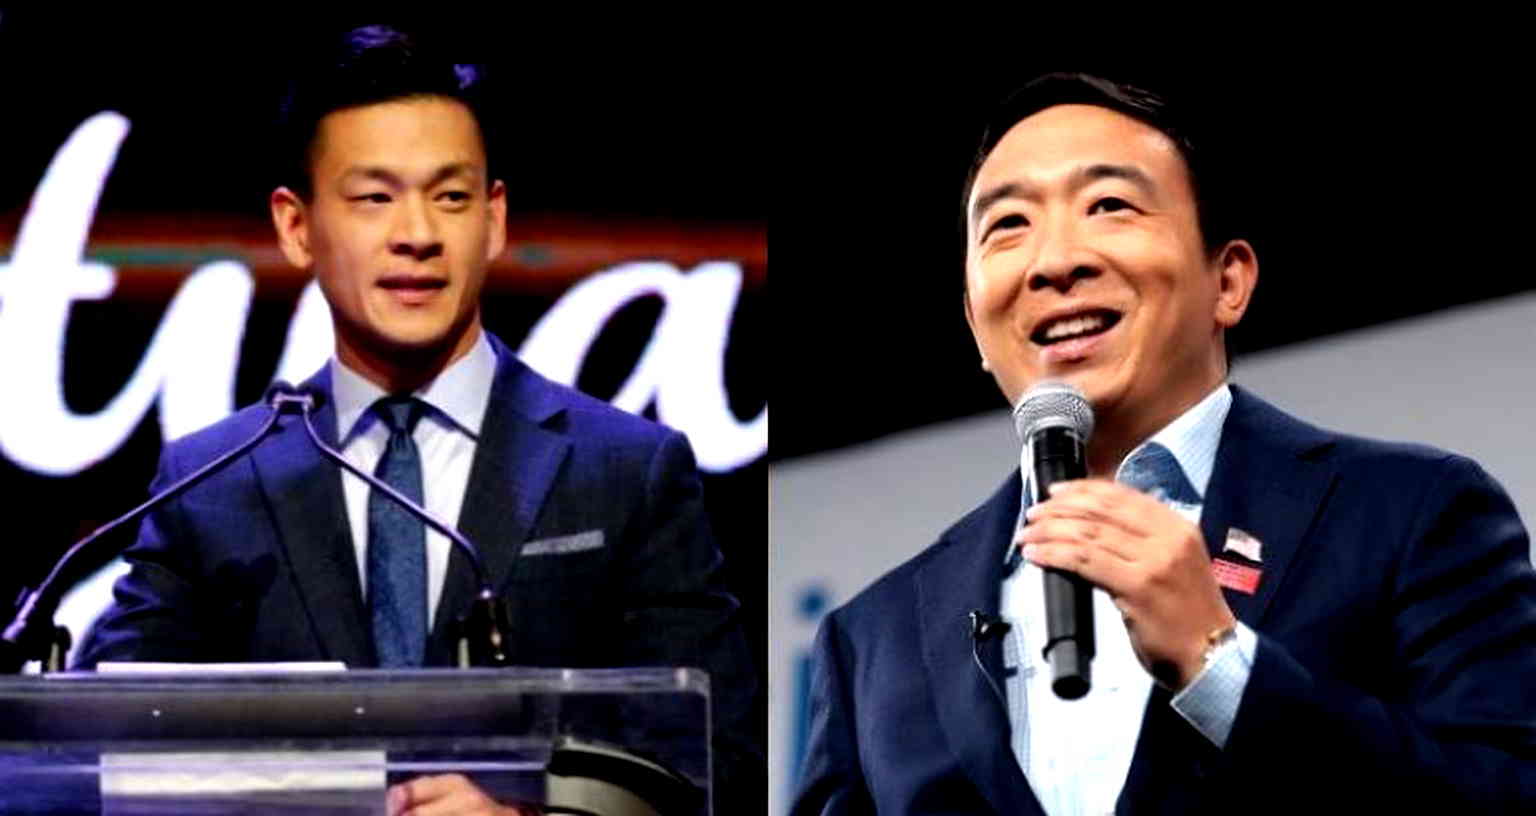 California State Assemblymember Evan Low Officially Joins Andrew Yang as National Campaign Co-Chair